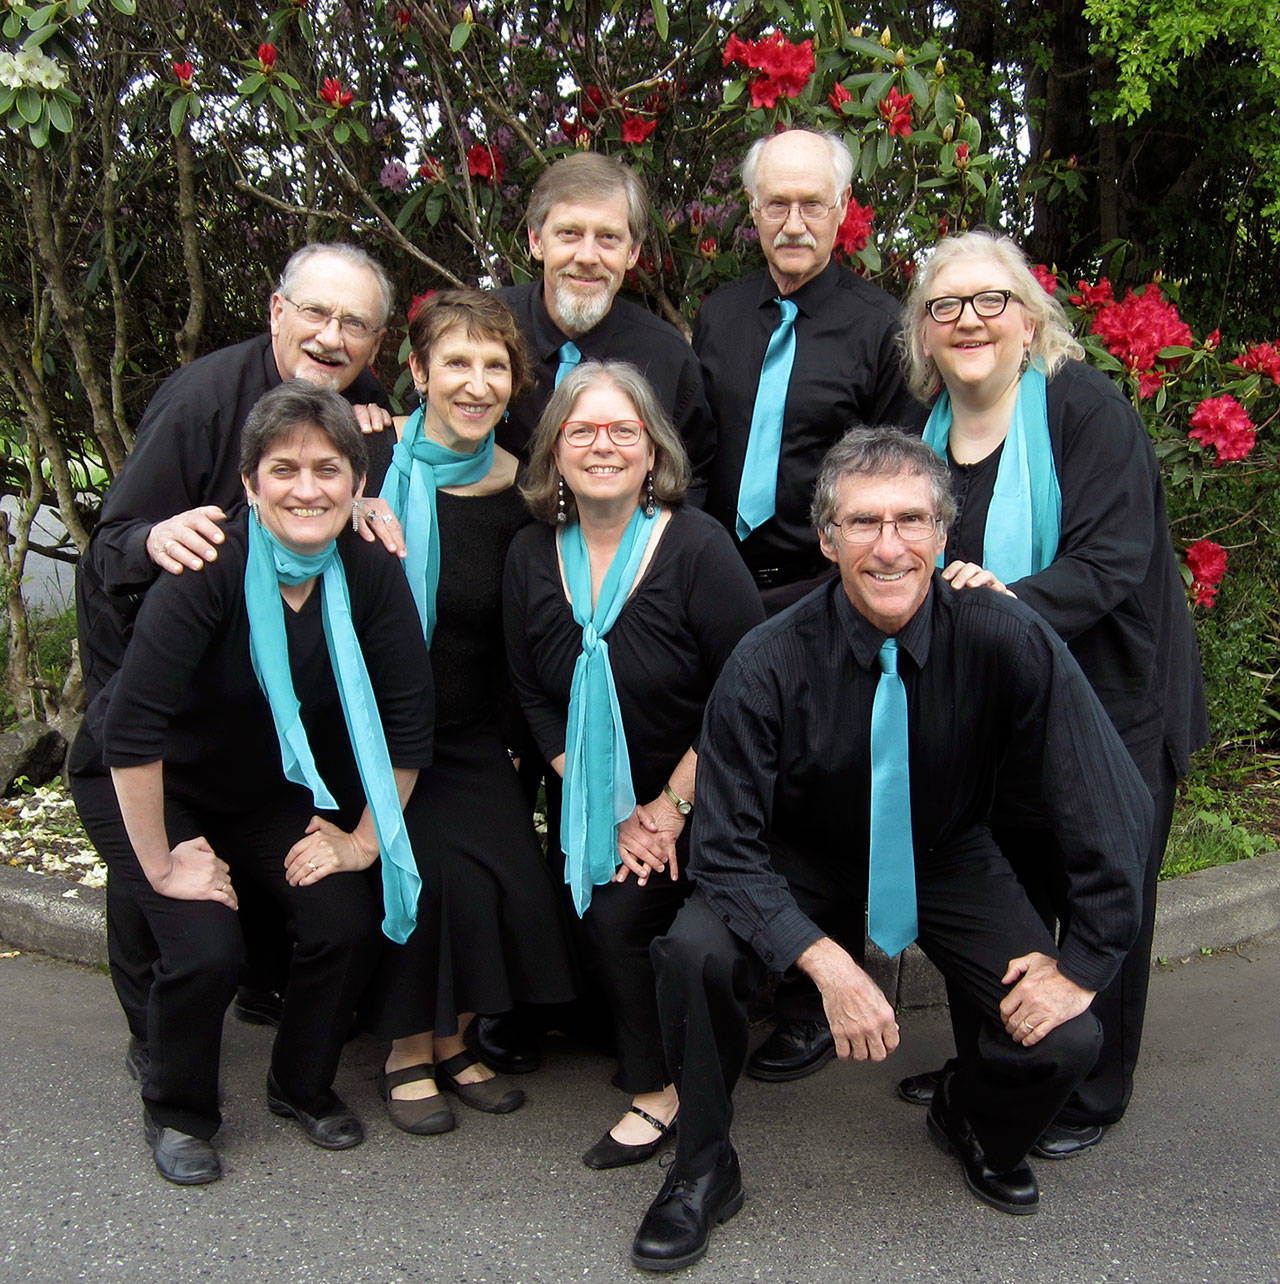 The Wild Rose Chorale celebrates its anniversary with the program “25 Years and Counting” in two concerts Friday and Saturday. Current personnel include Al Thompson, JES Schumacher, Charles Helman, Doug Rodgers, Marj Iuro, Brian Goldstein, Lynn Nowak and Leslie Lewis. (Pete Parrish)